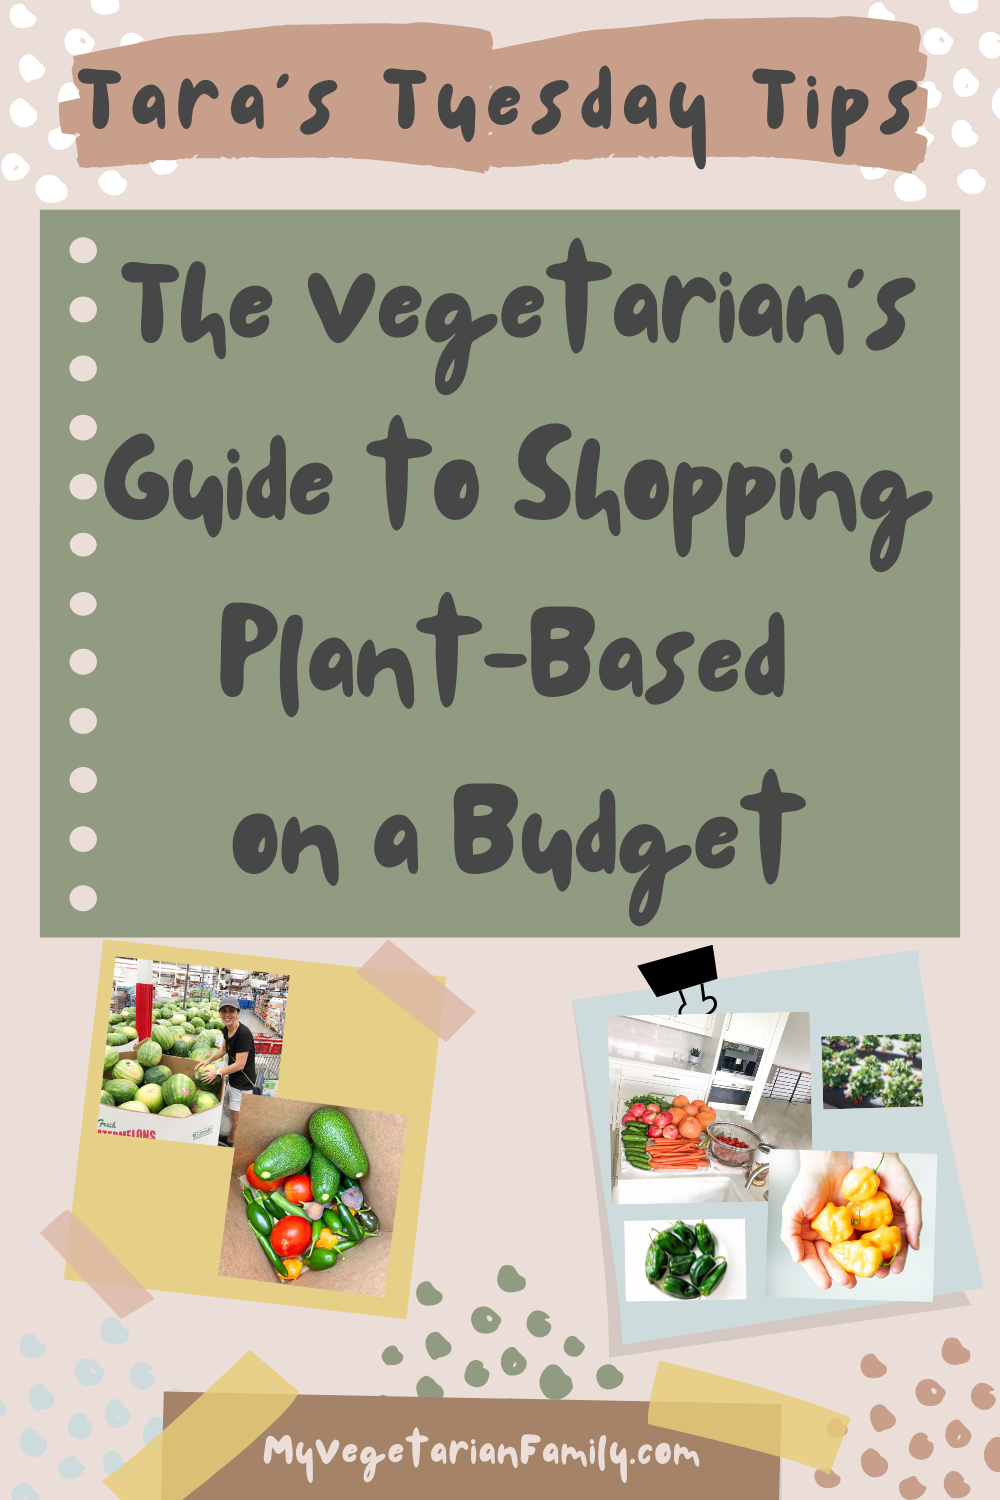 The Vegetarian's Guide To Shopping Plant-Based on a Budget | Tara's Tuesday Tips | My Vegetarian Family #nutritiontips #plantbasedbudget